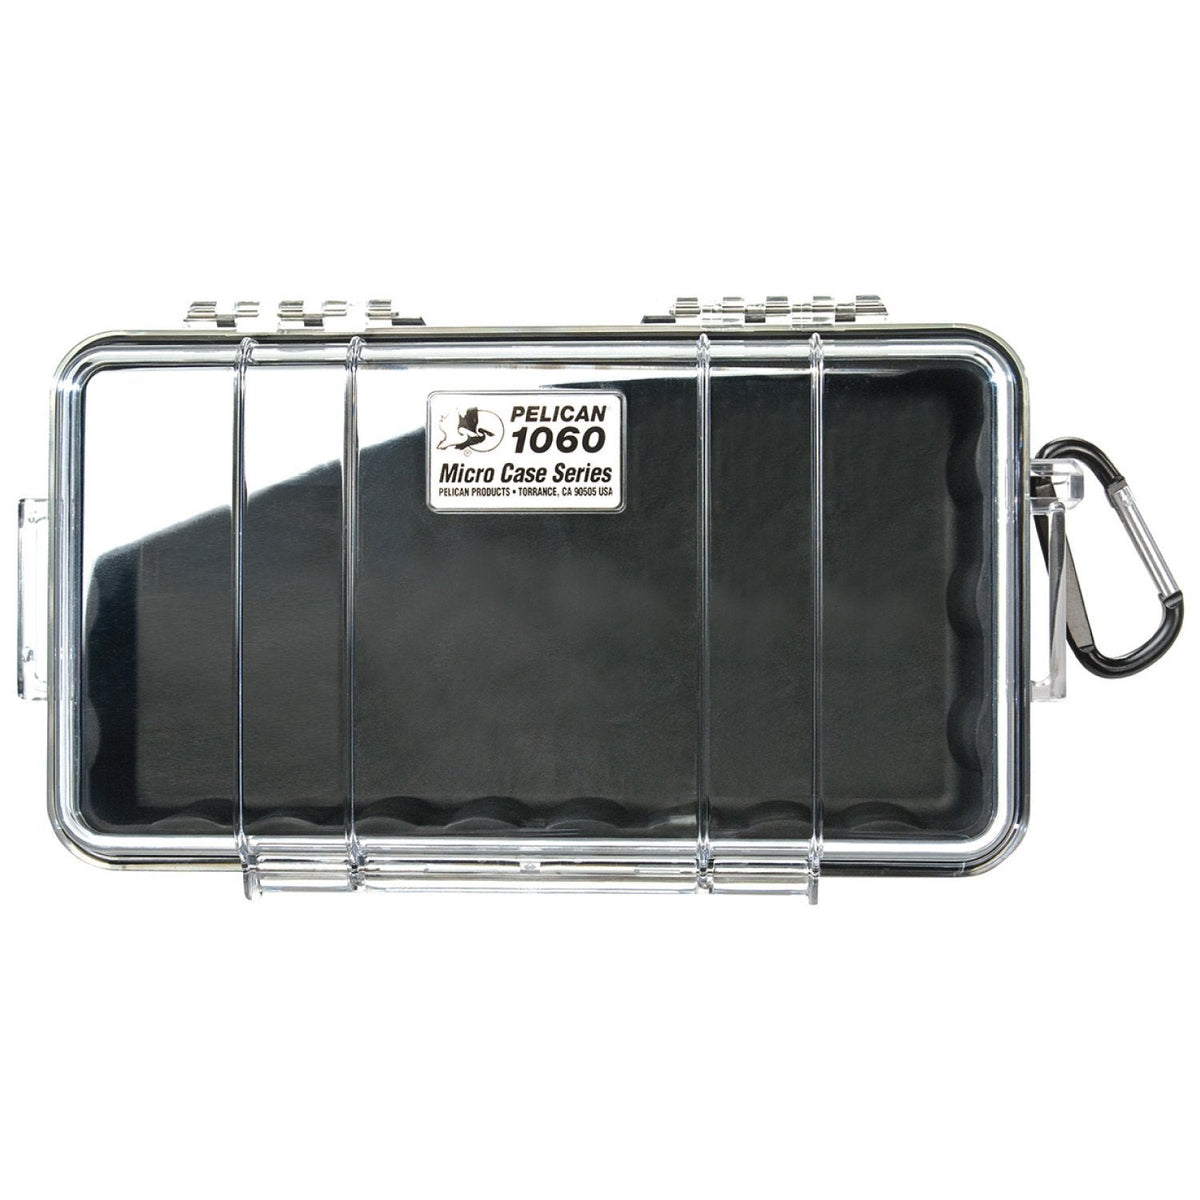 Pelican 1060 Micro Case Cases Pelican Products Clear Shell with Black Liner Tactical Gear Supplier Tactical Distributors Australia